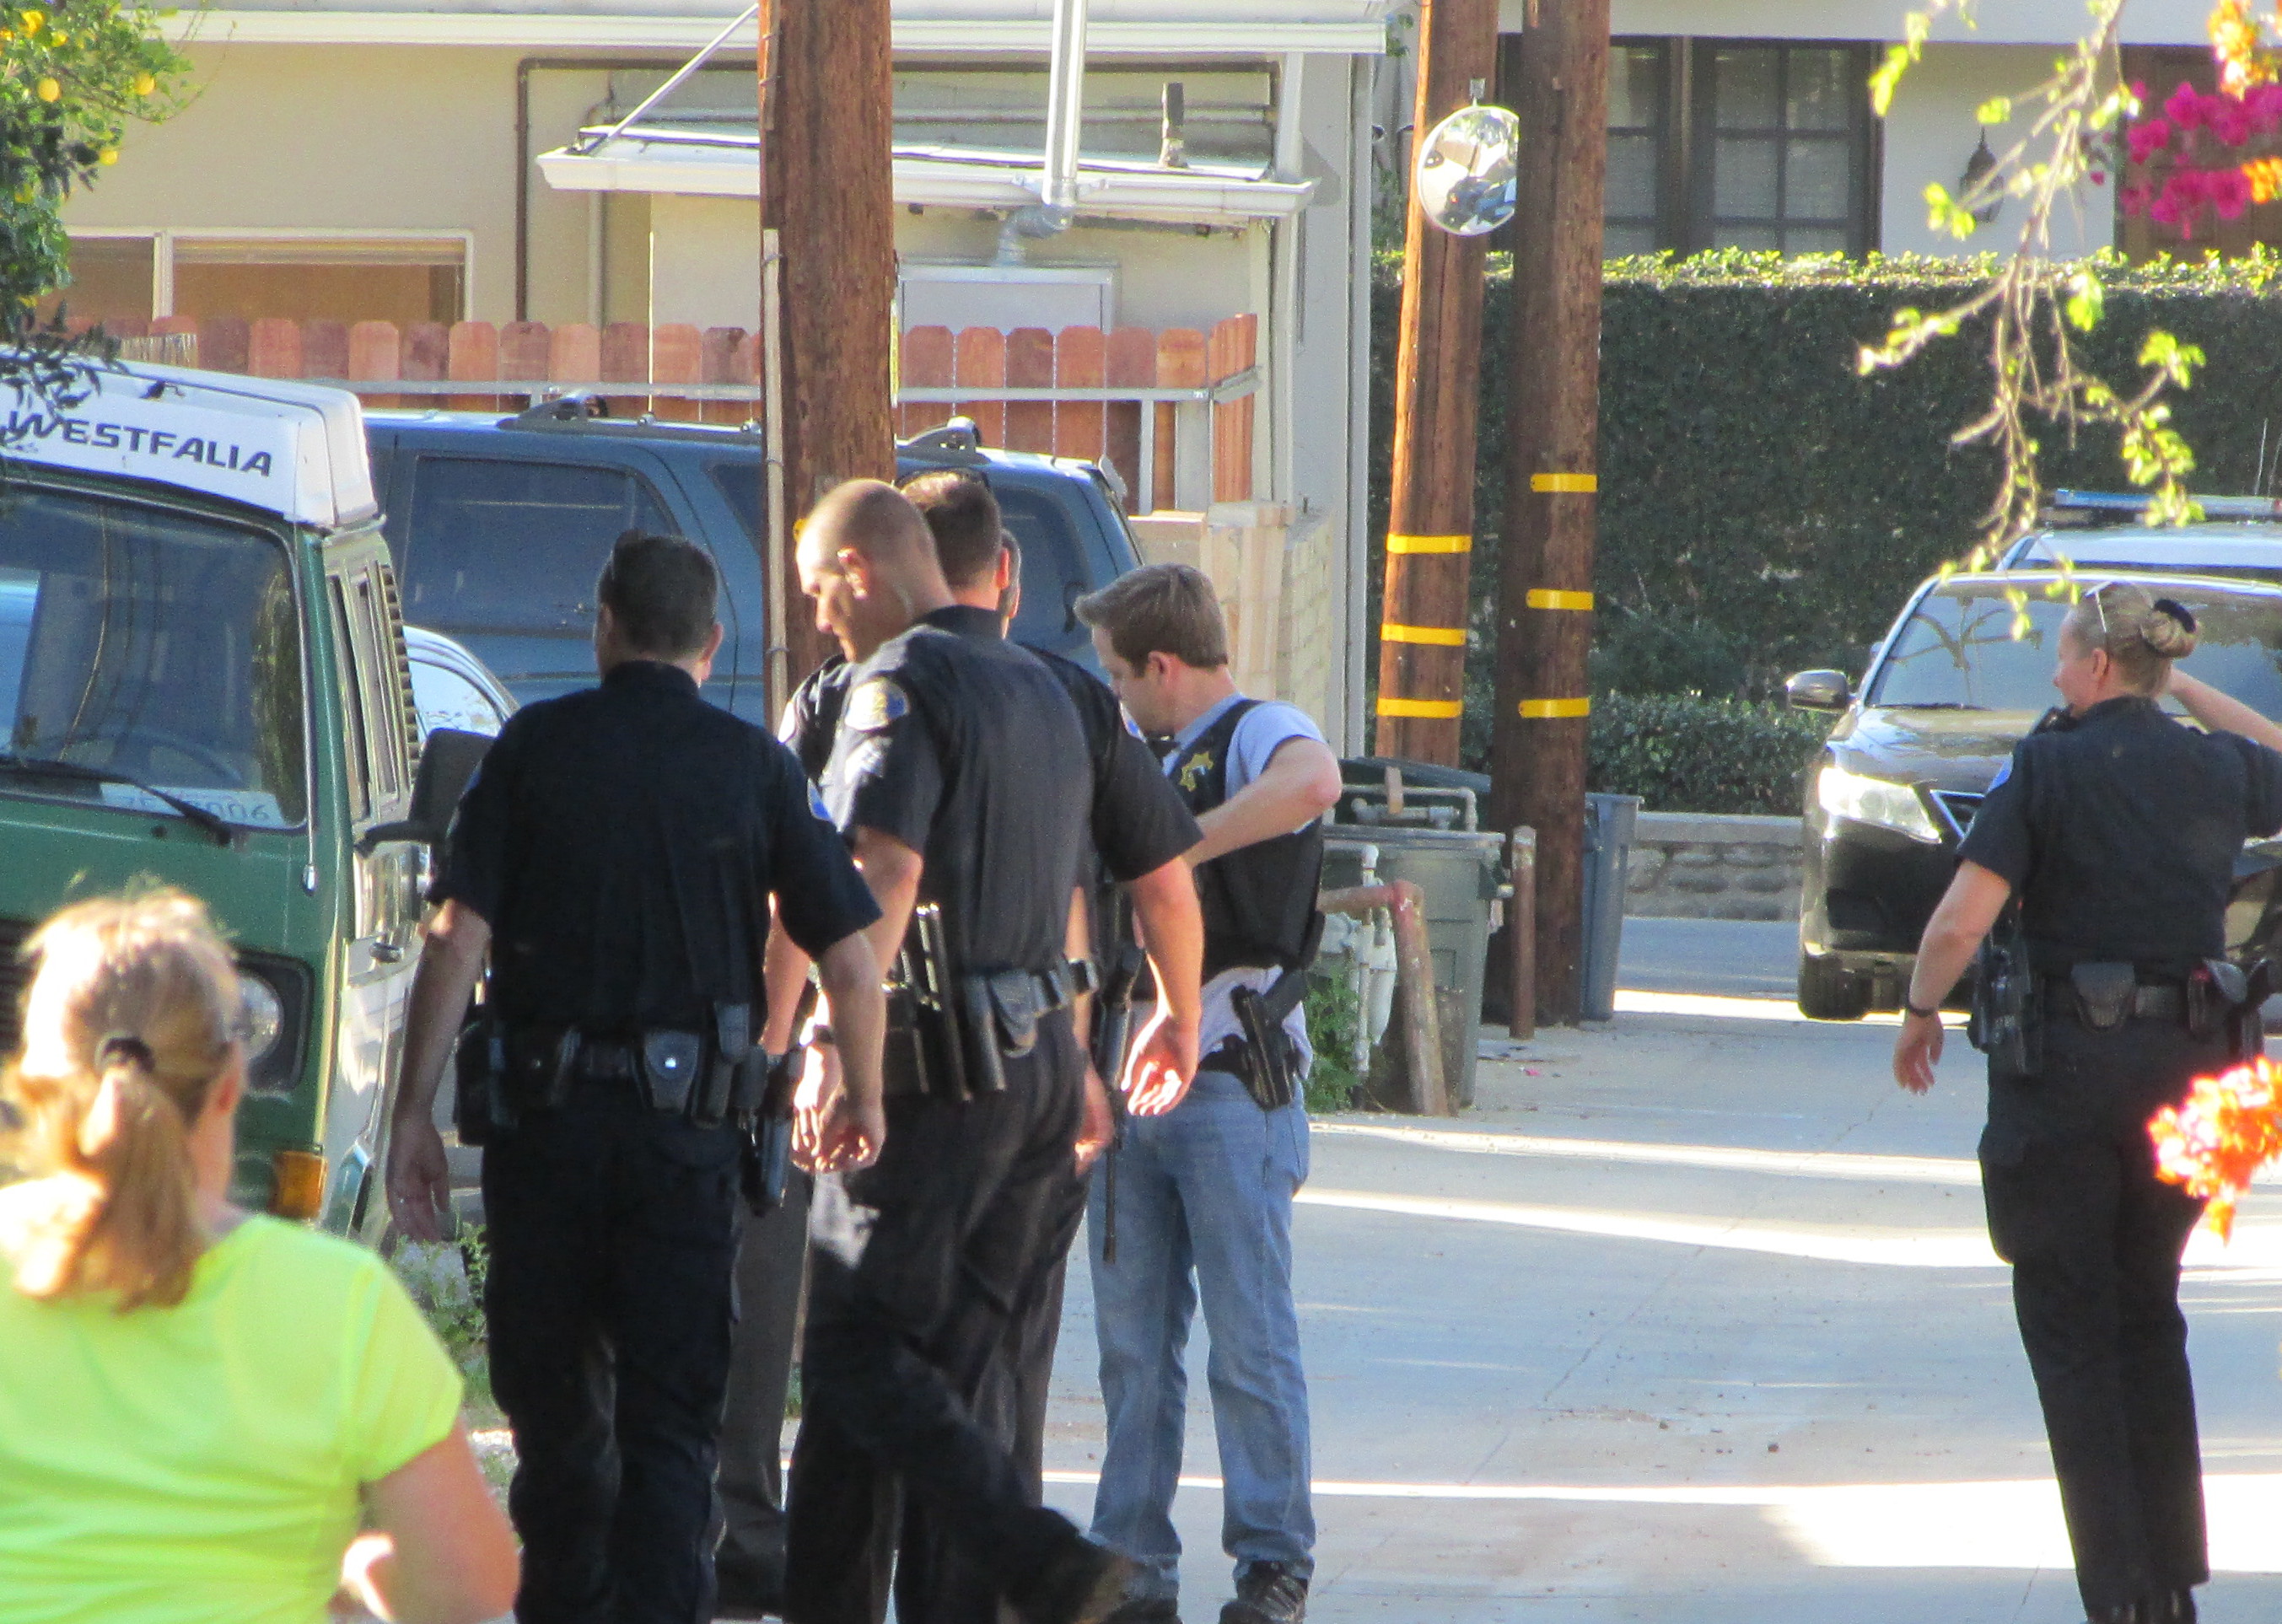 On-the-run Suspect Apprehended by Glendora PD